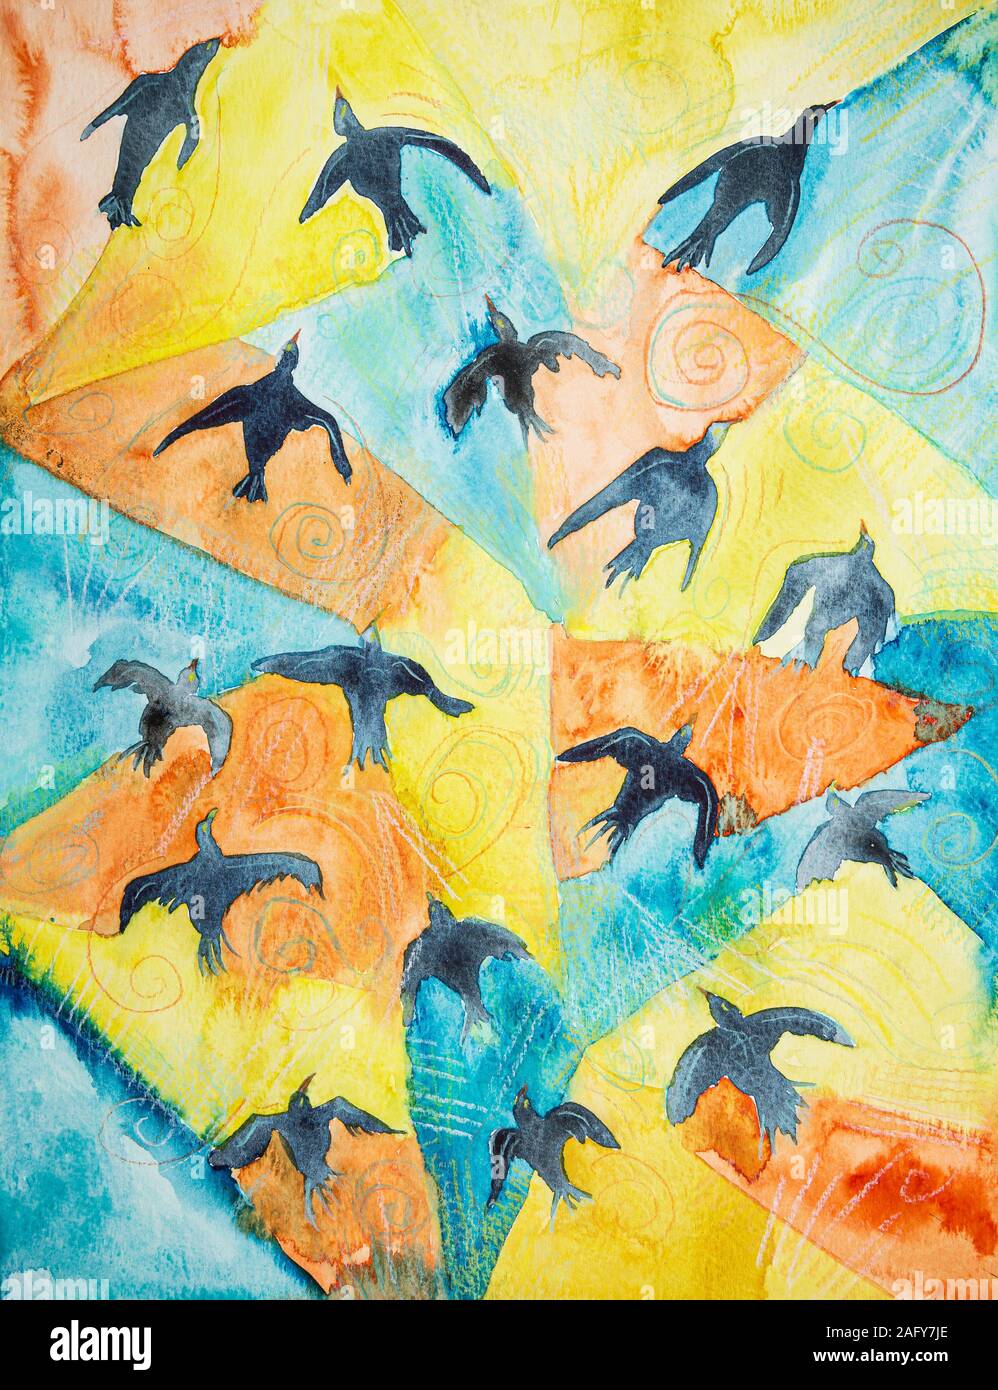 Bird flock in the heavenly sky. The dabbing technique near the edges gives a soft focus effect due to the altered surface roughness of the paper. Stock Photo